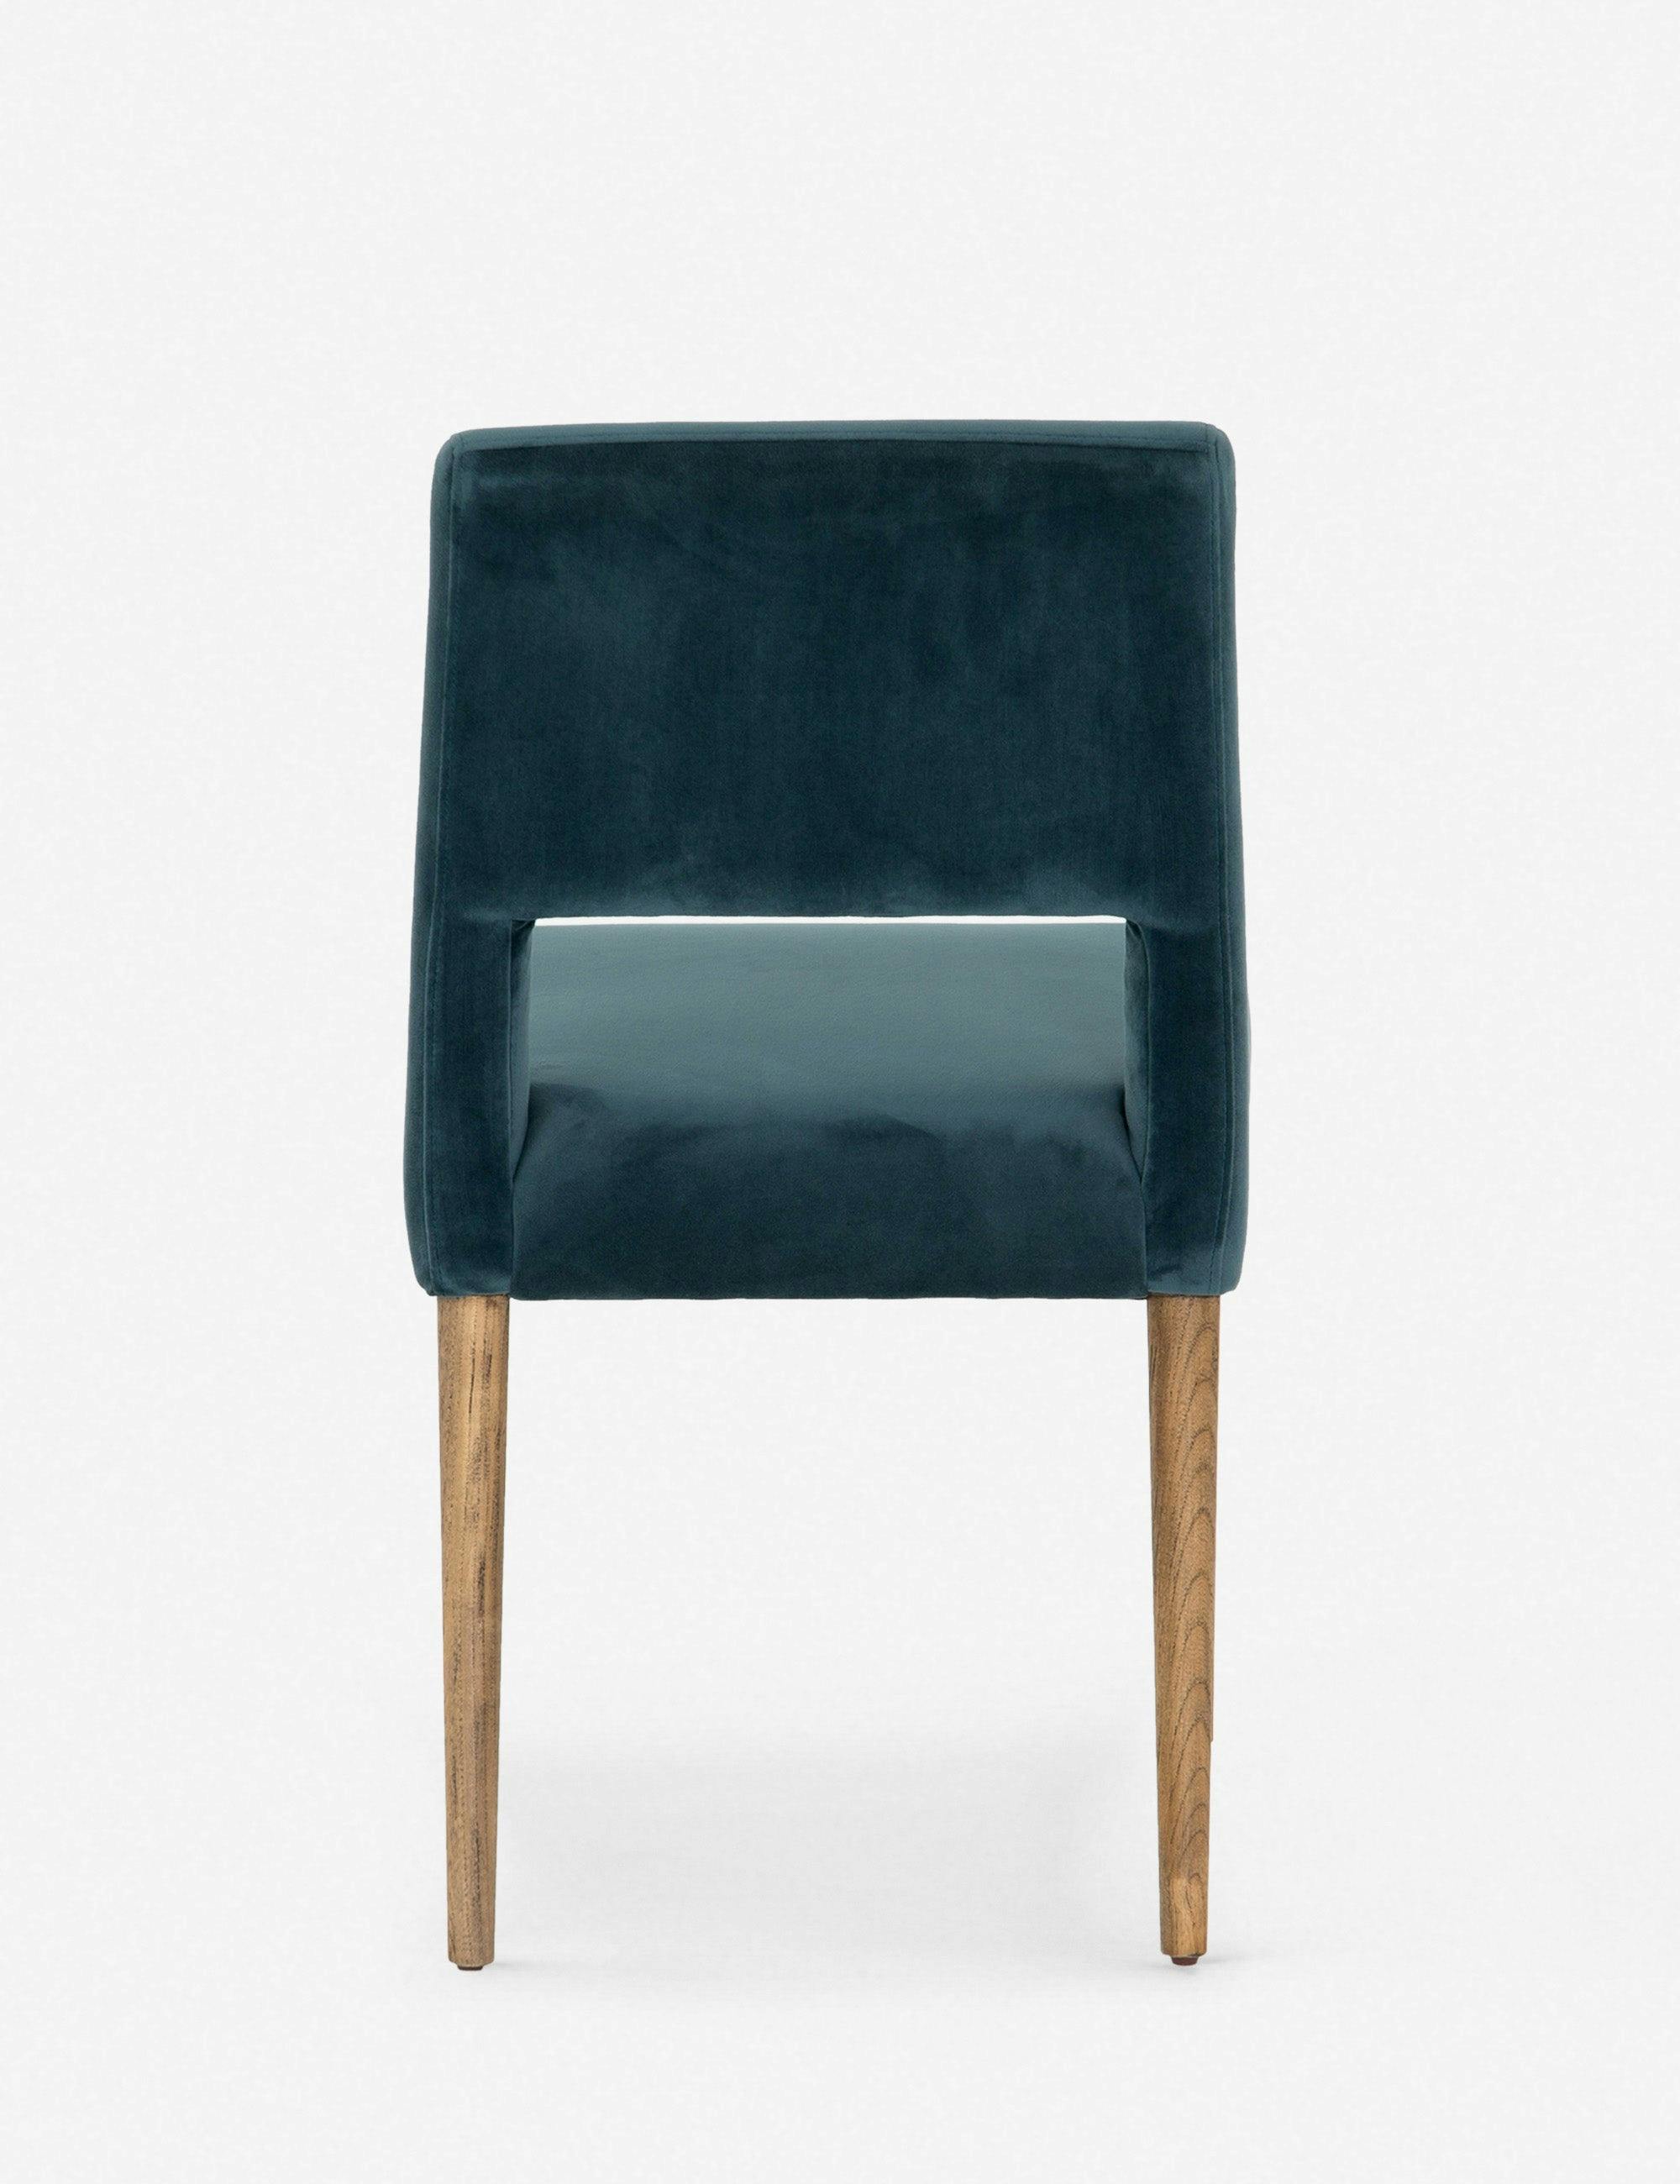 Contemporary Azure Blue Leather Side Chair with Wooden Legs